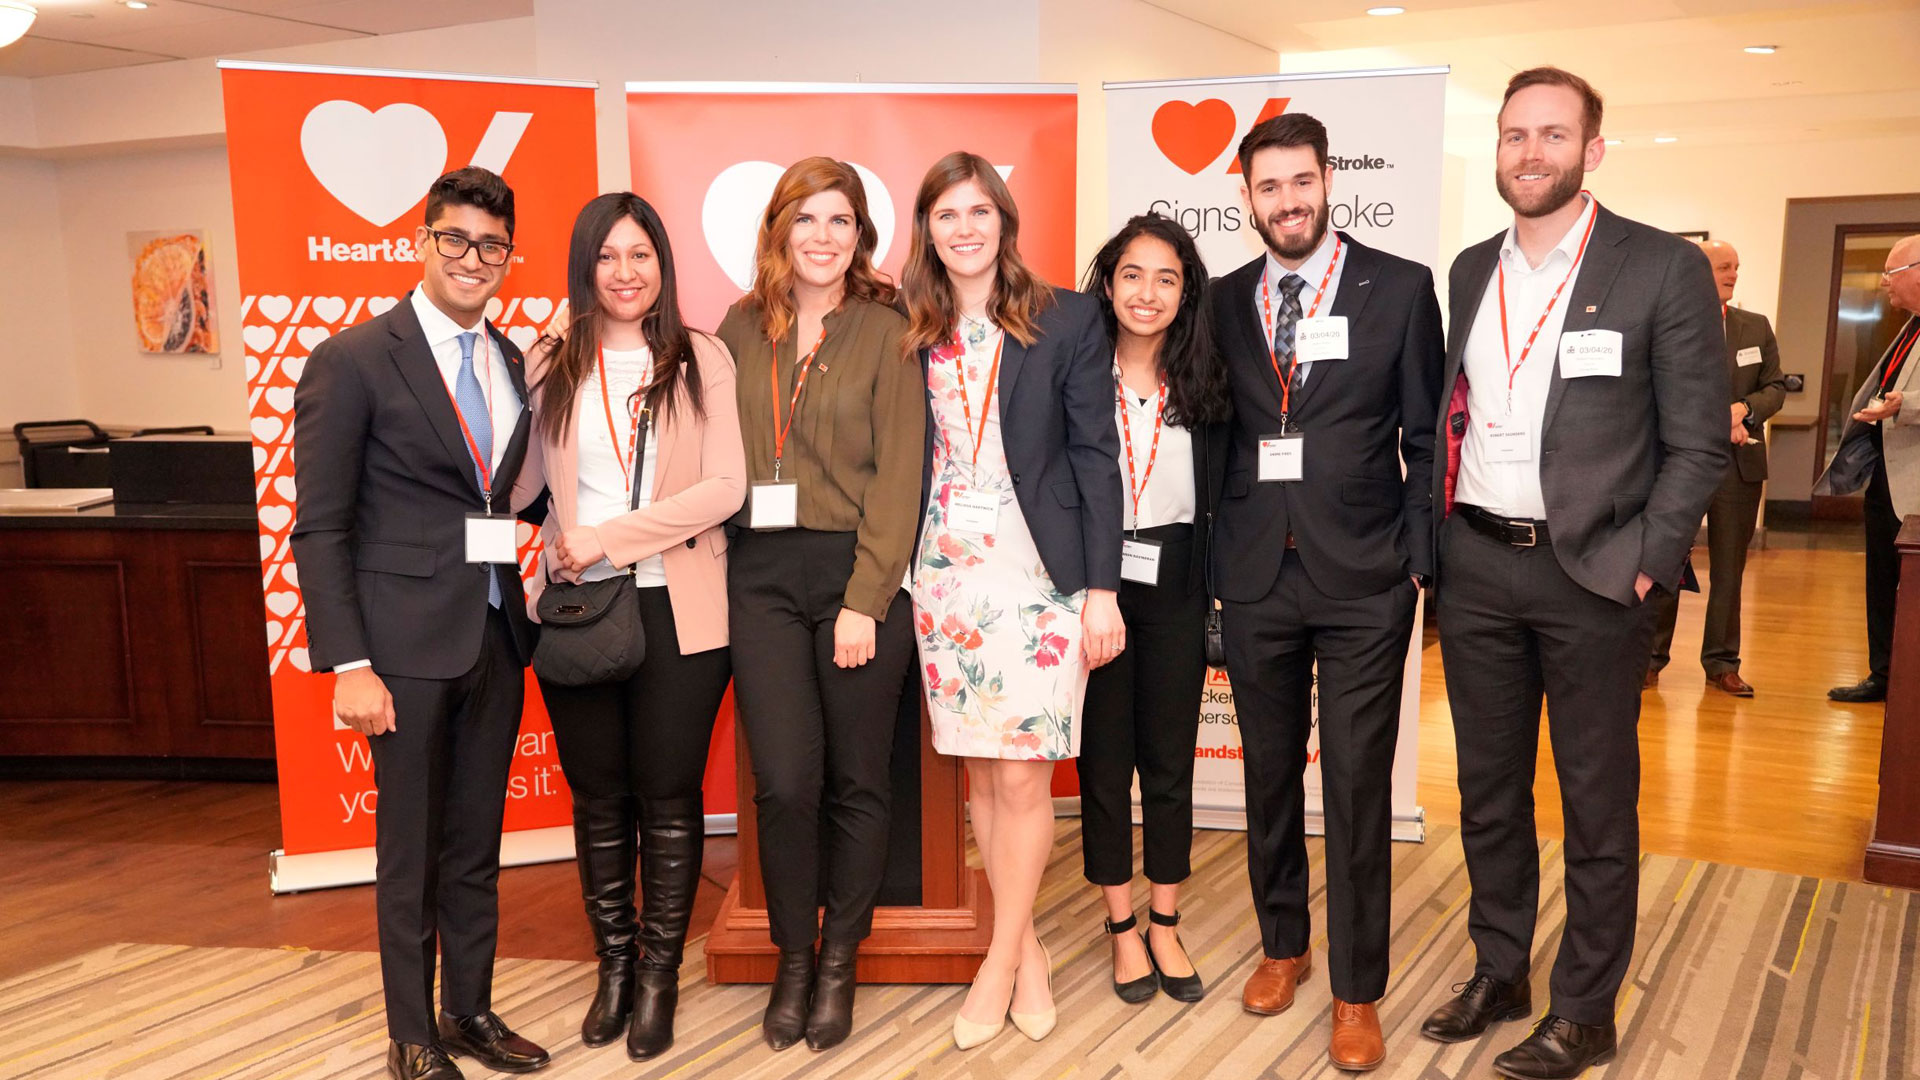 The Heart & Stroke Young Leaders committee at an event